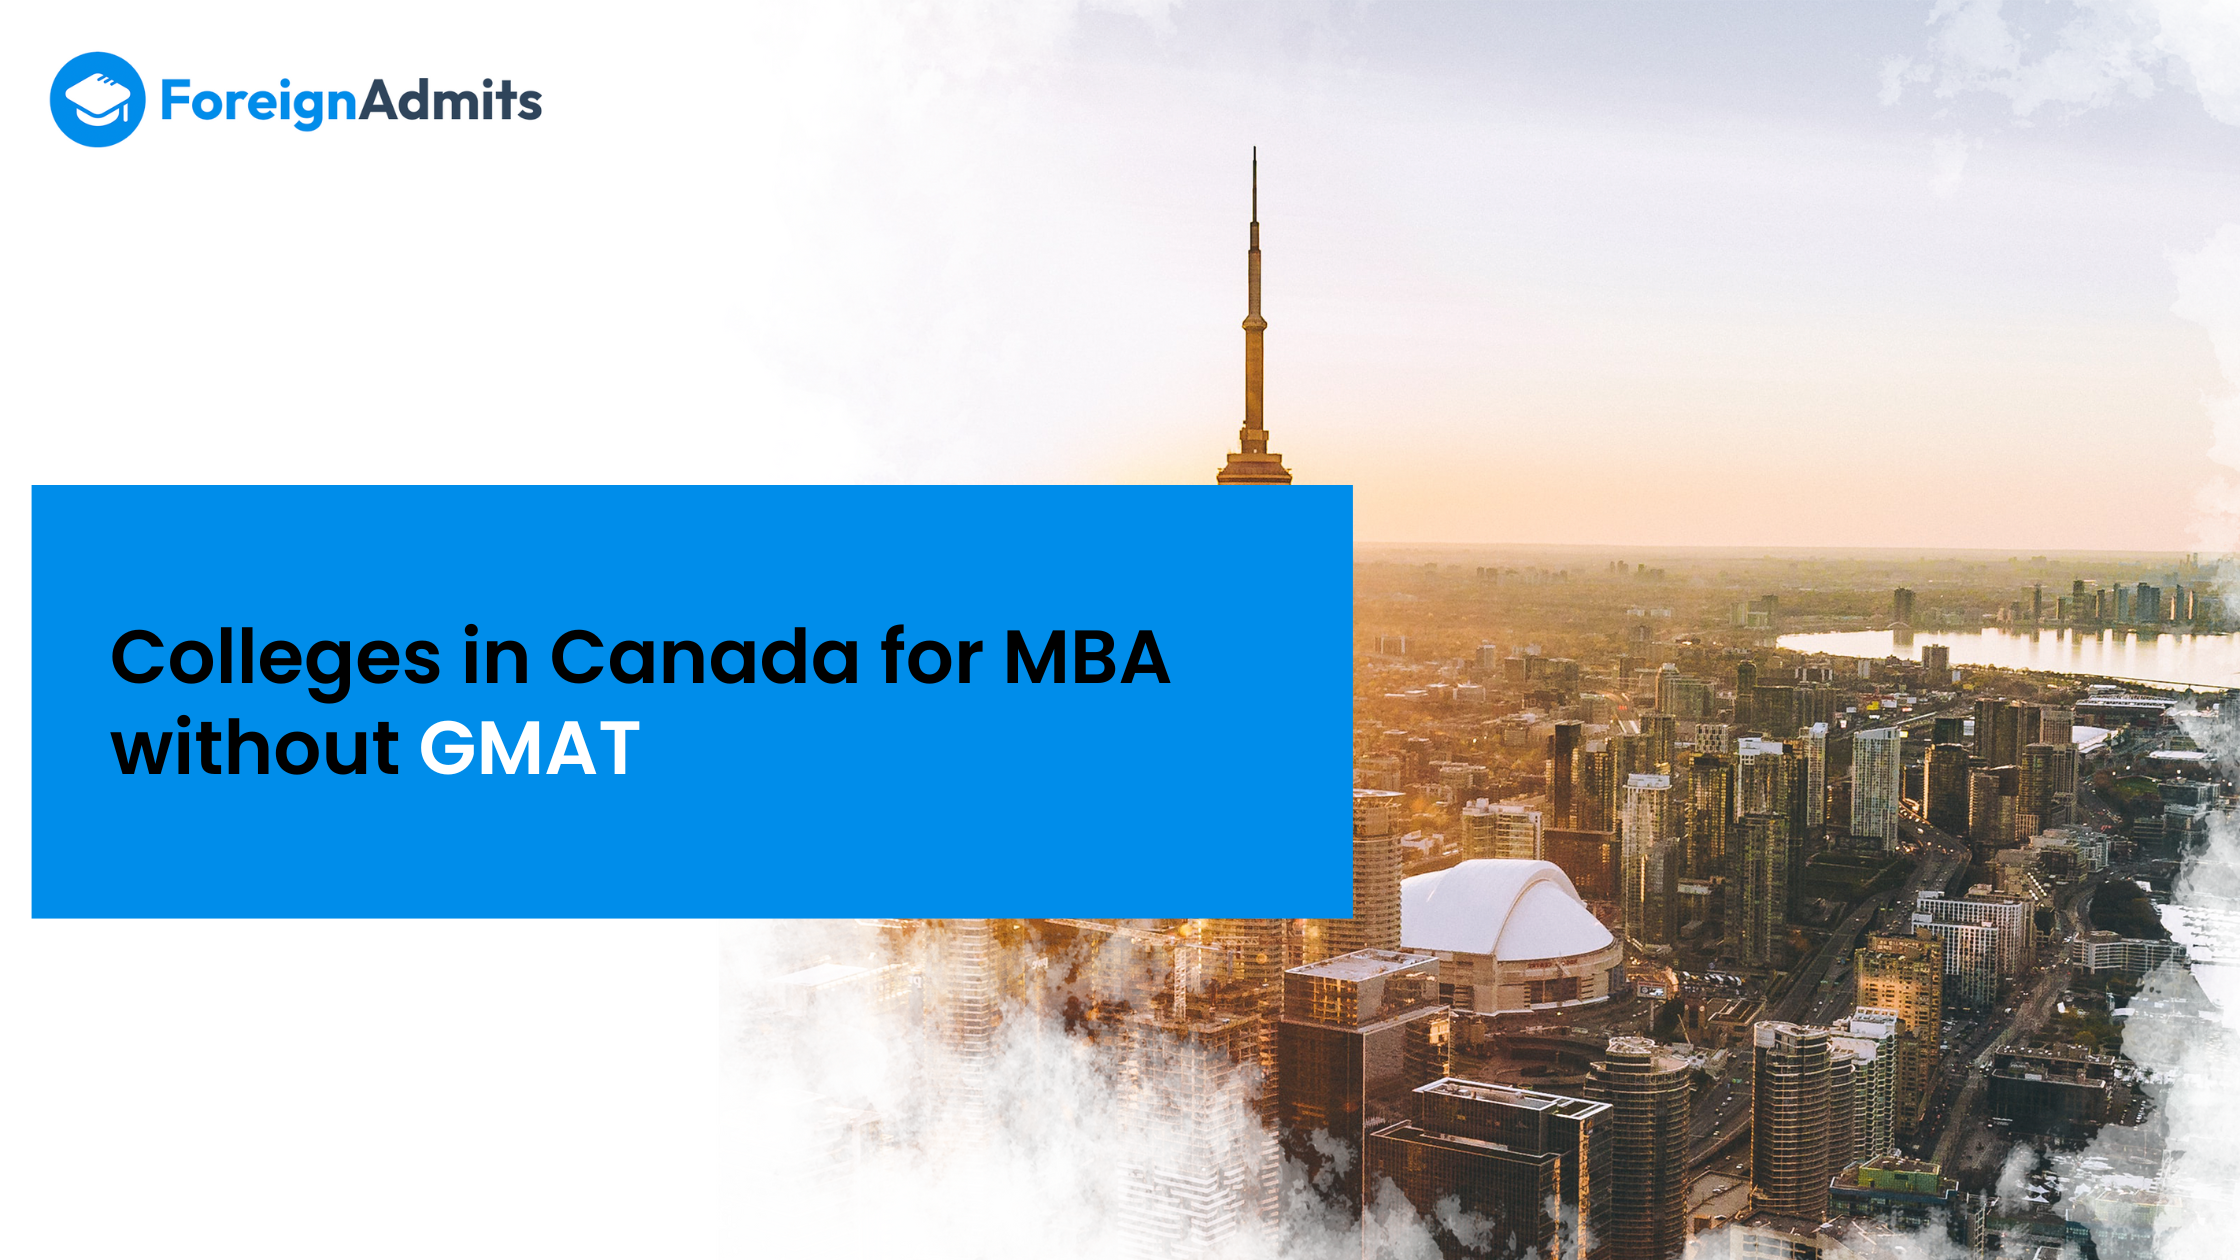 Colleges in Canada for MBA without GMAT.